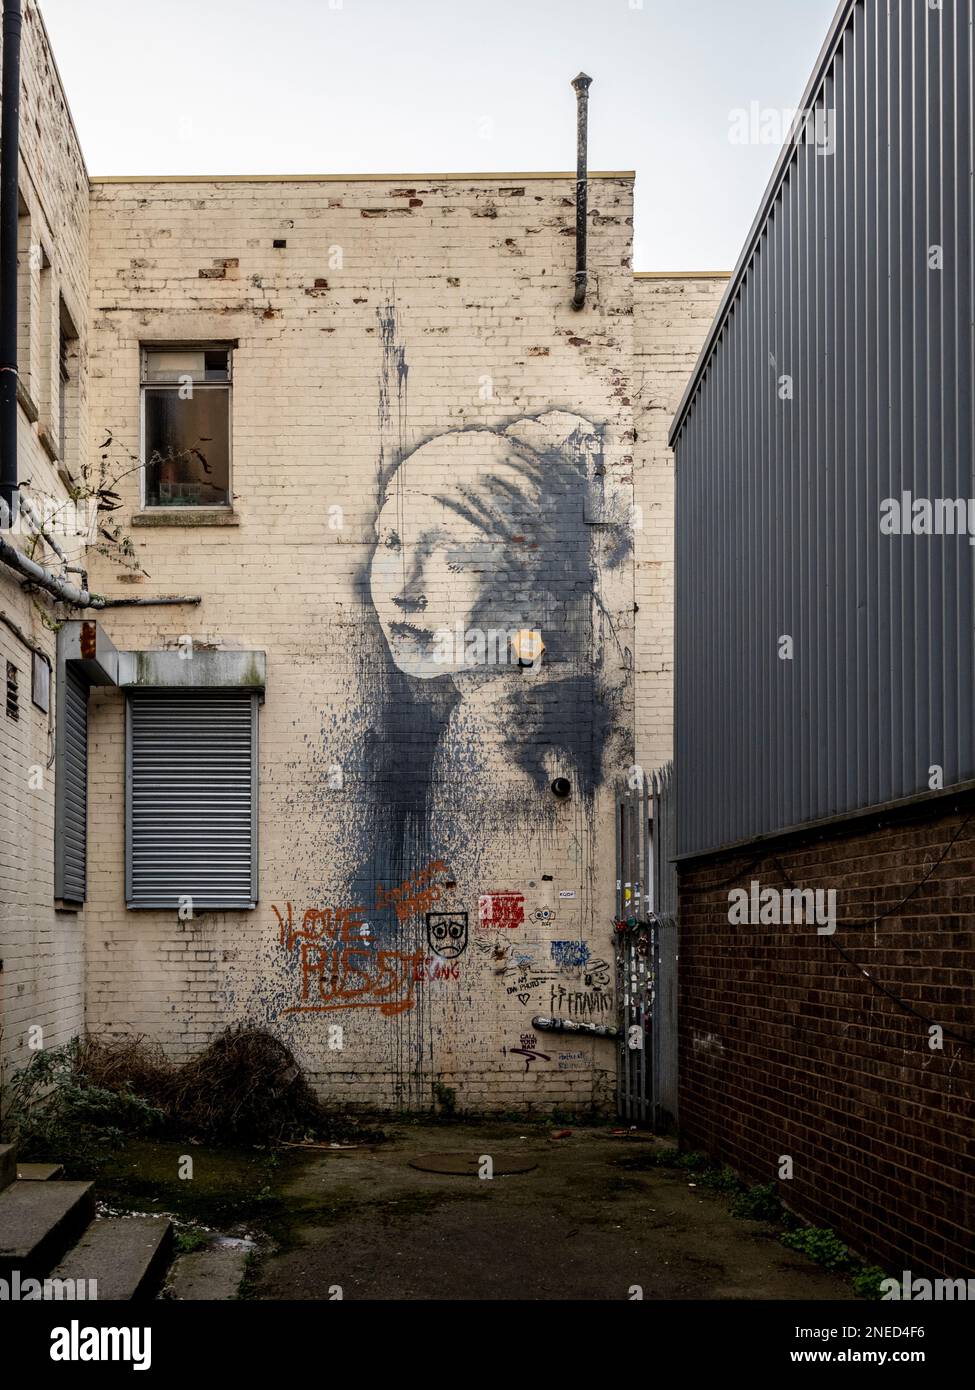 Banksy Bristol alleyway graffiti mural The Girl with the Pierced Eardrum inspired by Vermeer's Girl with a Pearl Earring. Bristol. UK Stock Photo